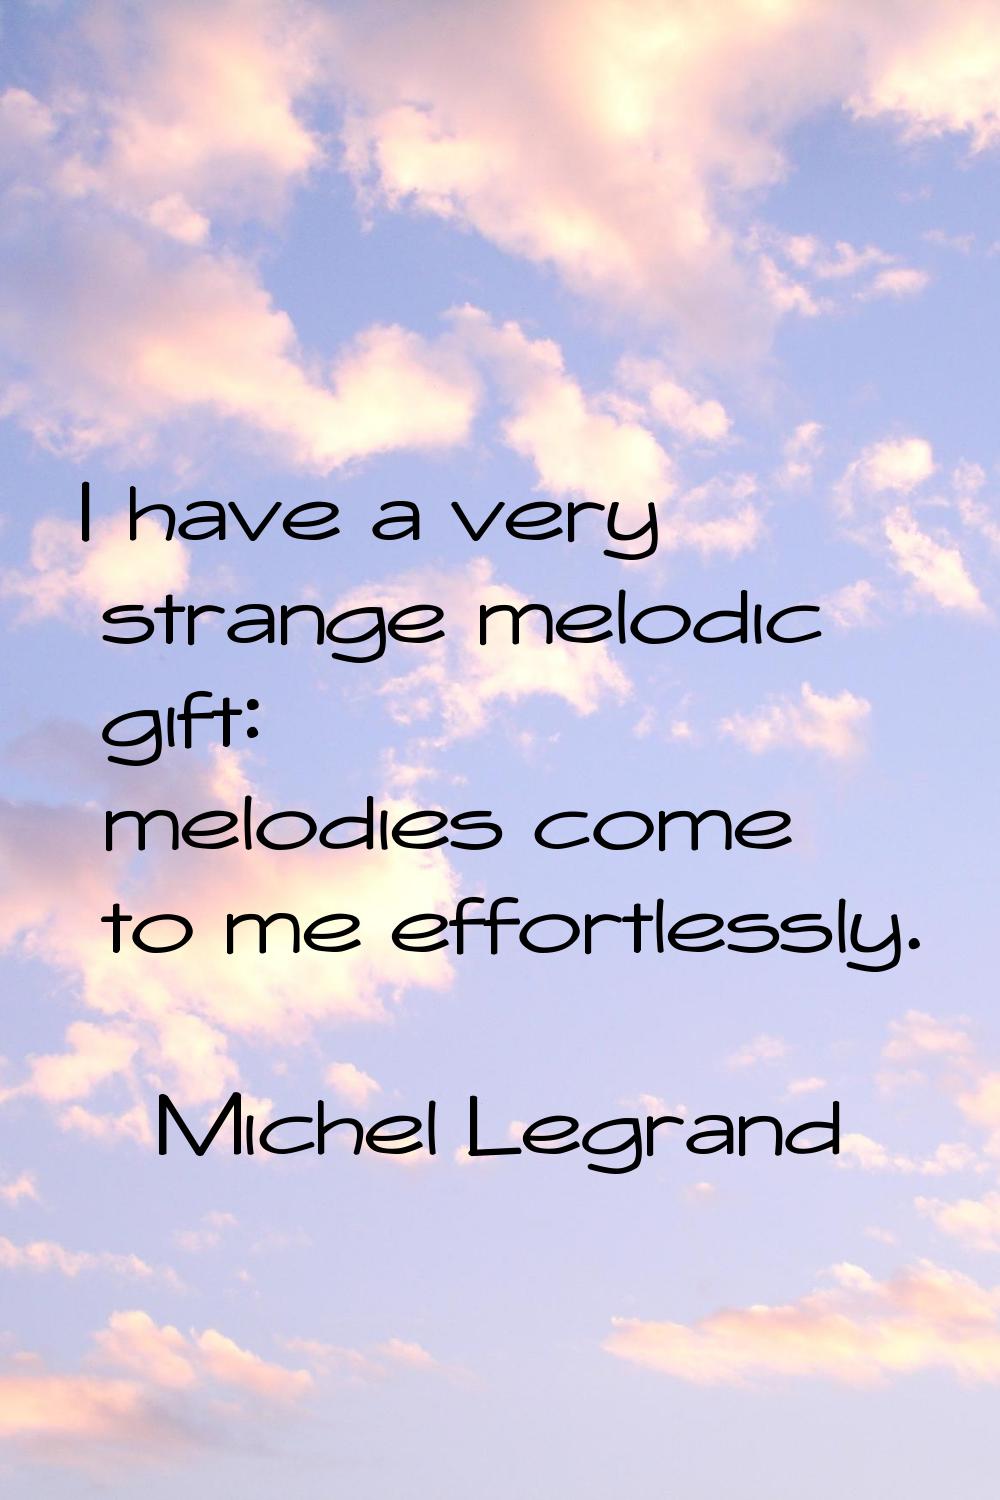 I have a very strange melodic gift: melodies come to me effortlessly.